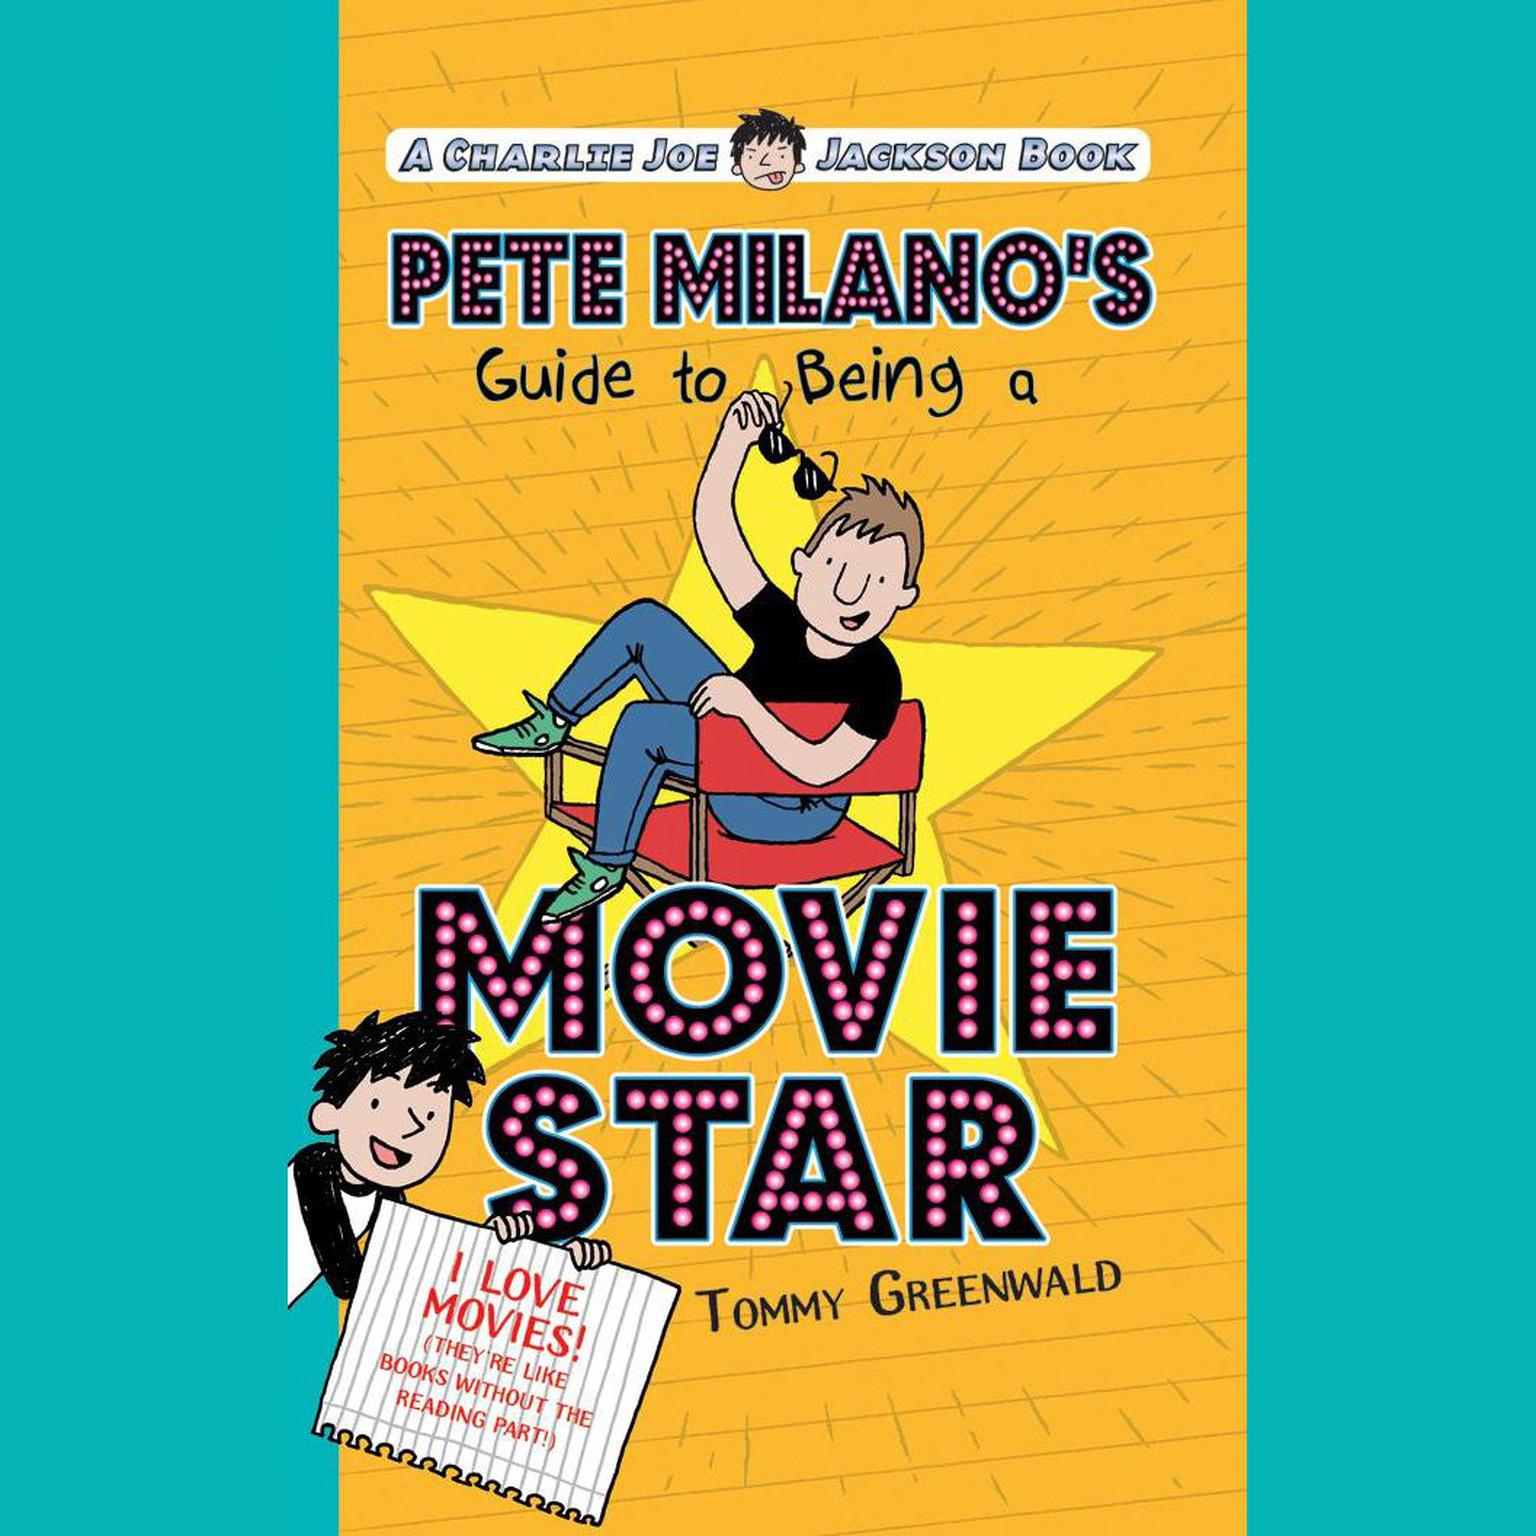 Pete Milanos Guide to Being a Movie Star Audiobook, by Tommy Greenwald